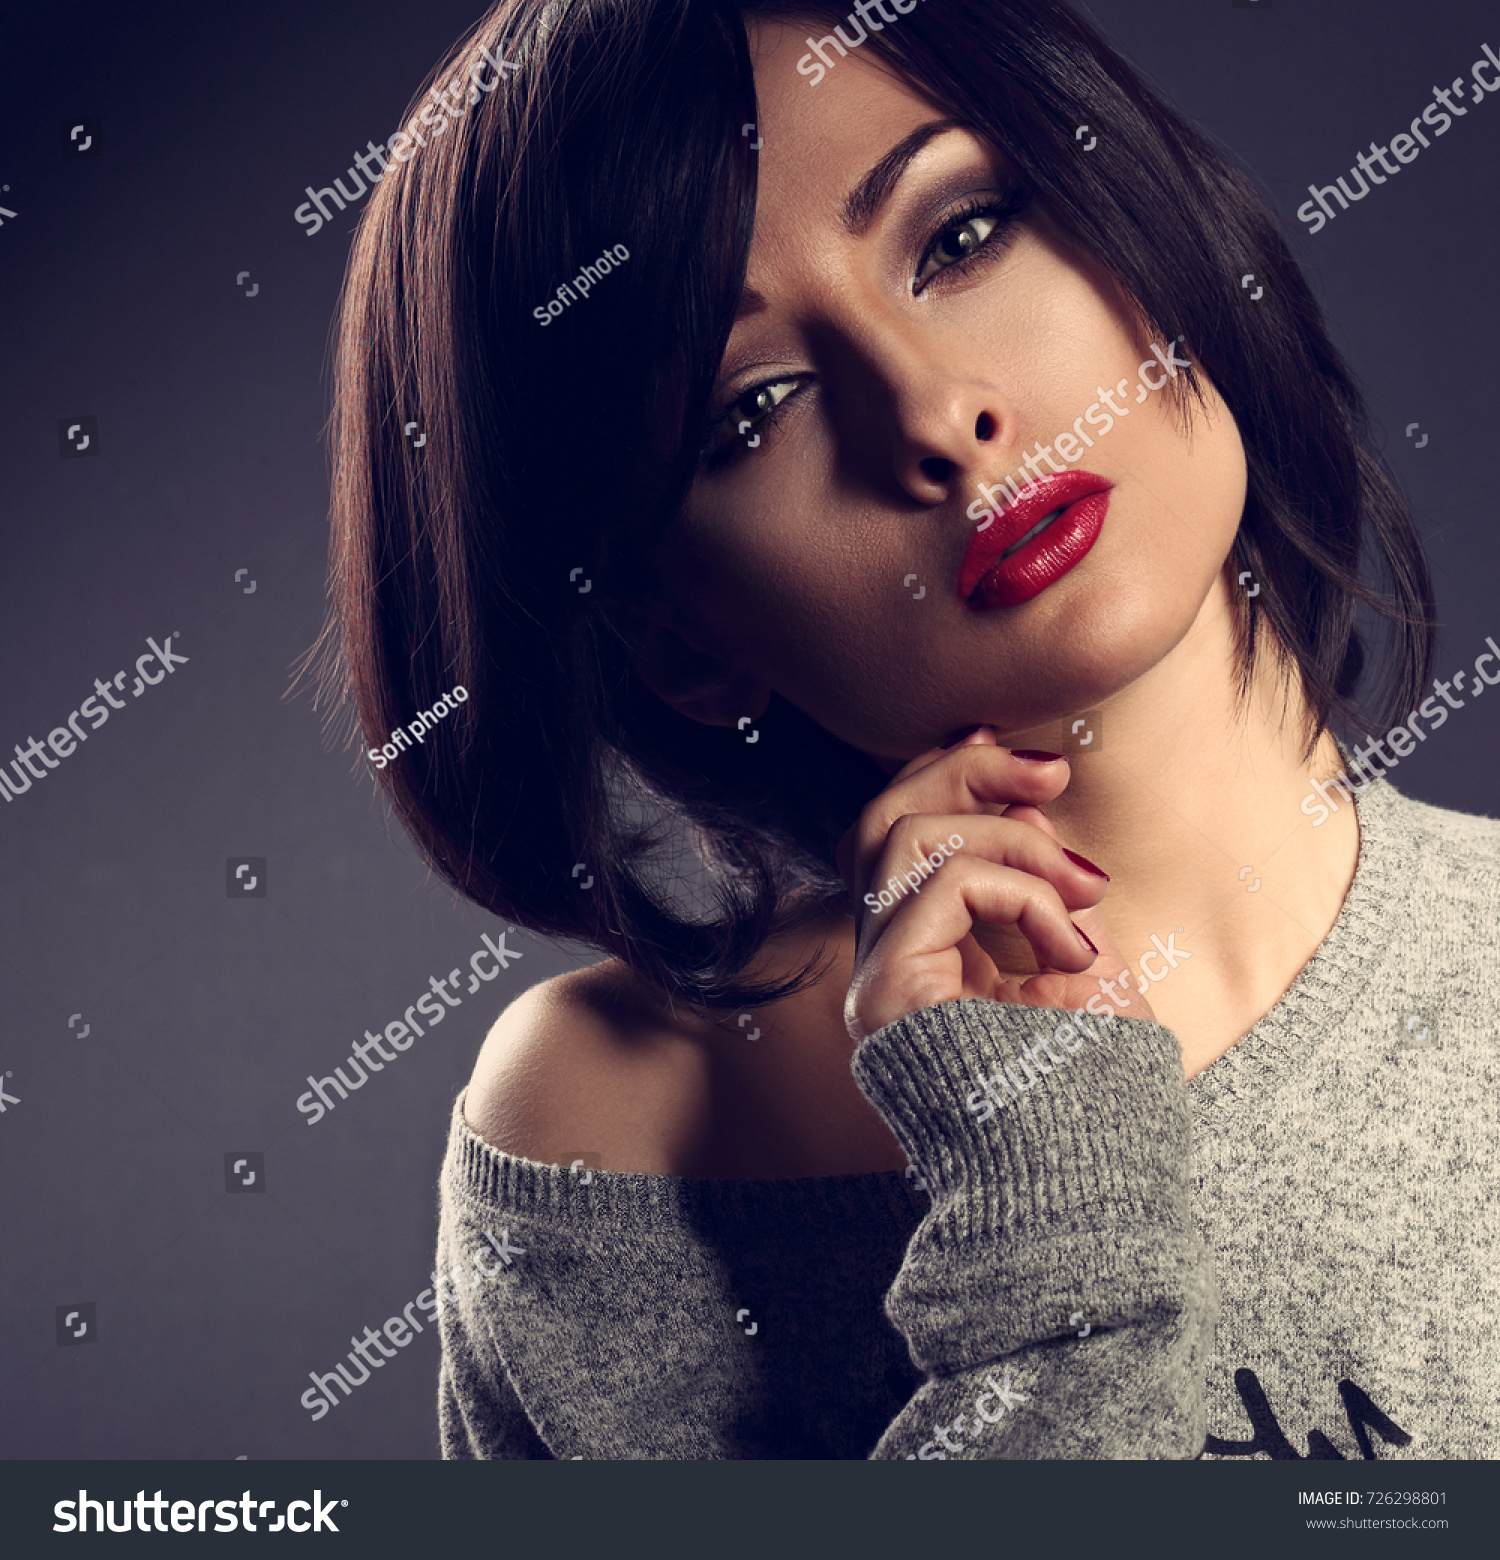 Sexy Cocky Emotion Makeup Woman Short Stock Photo 726298801 ...